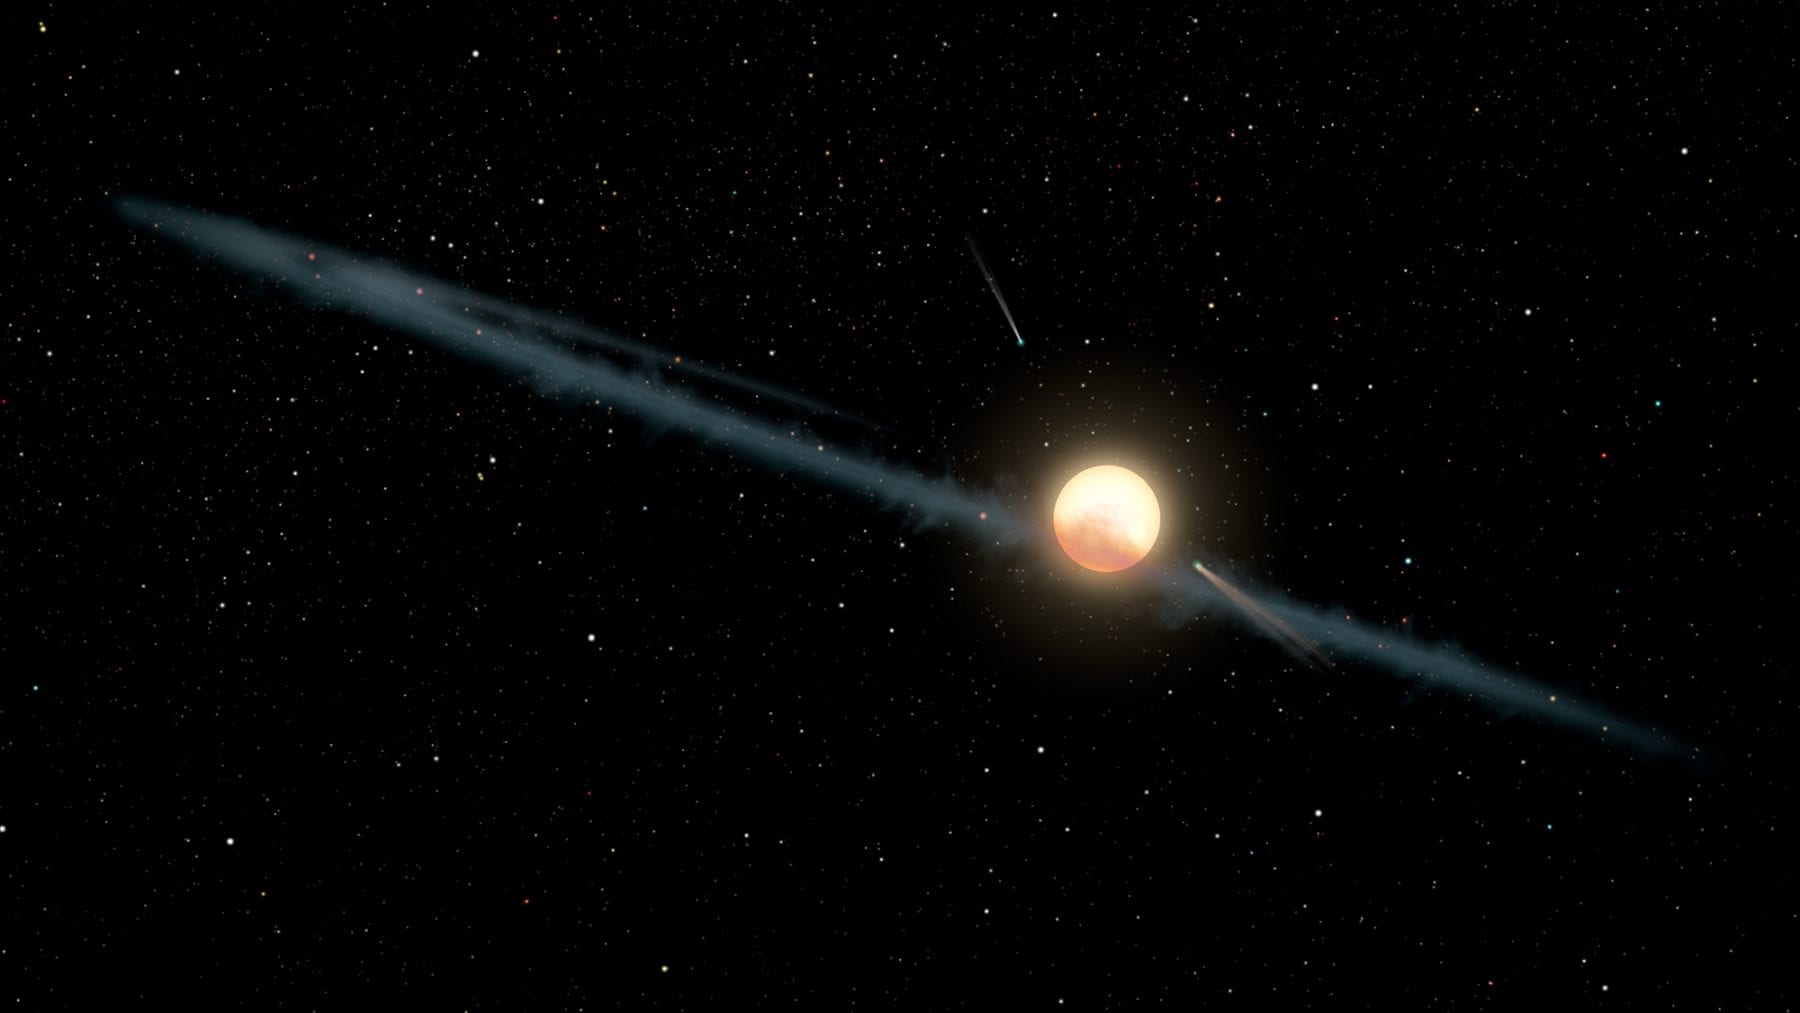 This illustration depicts a hypothetical uneven ring of dust orbiting KIC 8462852, also known as Boyajian’s Star or Tabby's Star. Source: NASA